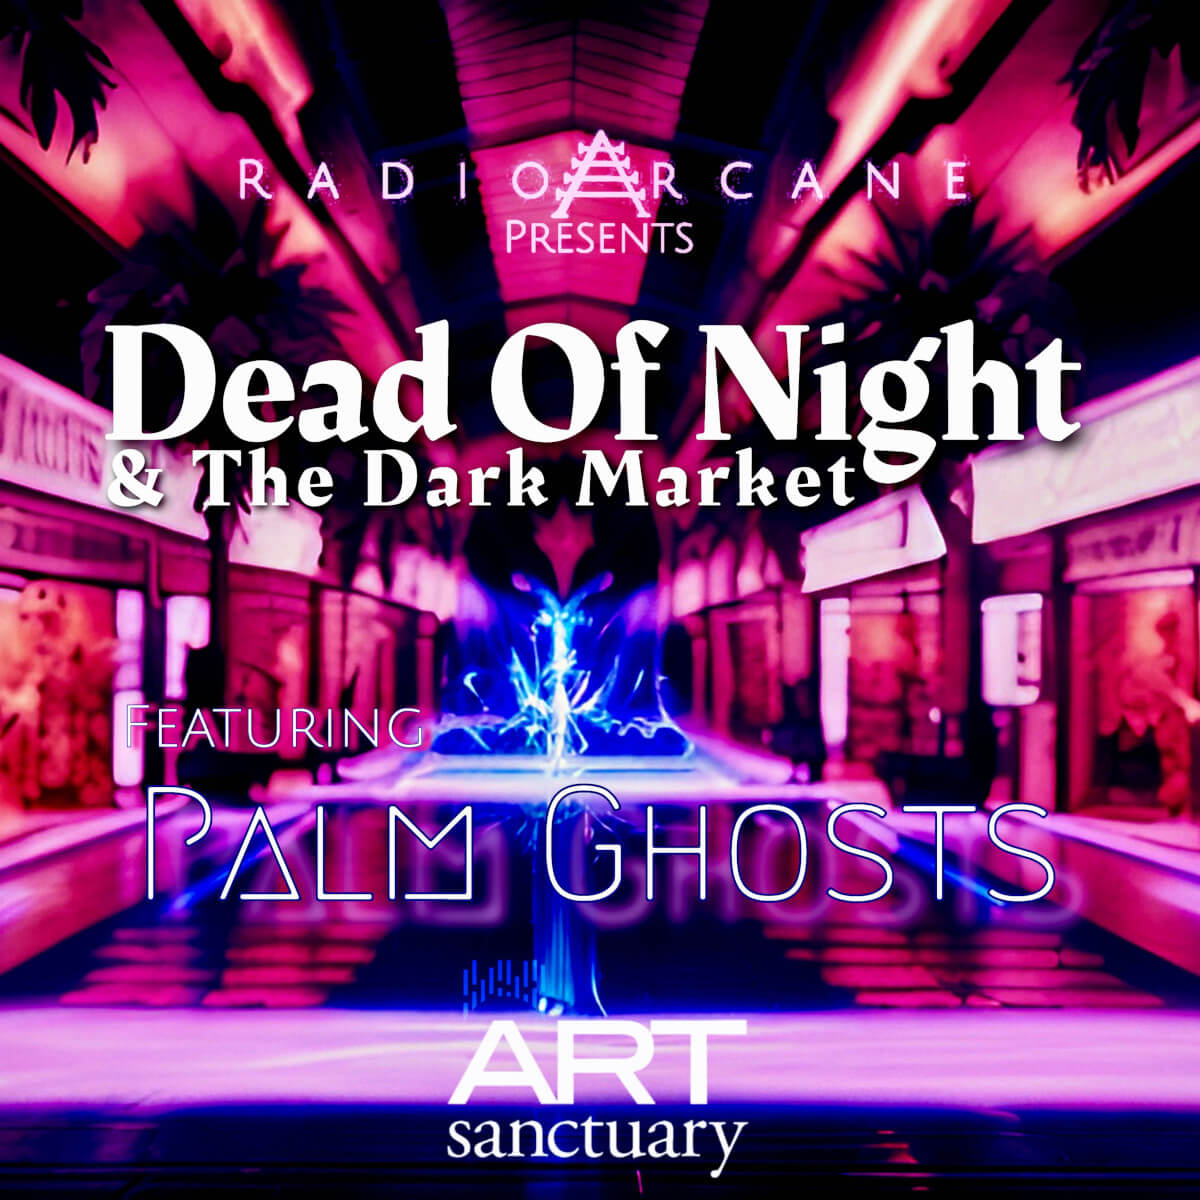 Dead Of Night & The Dark Market feat. Palm Ghosts